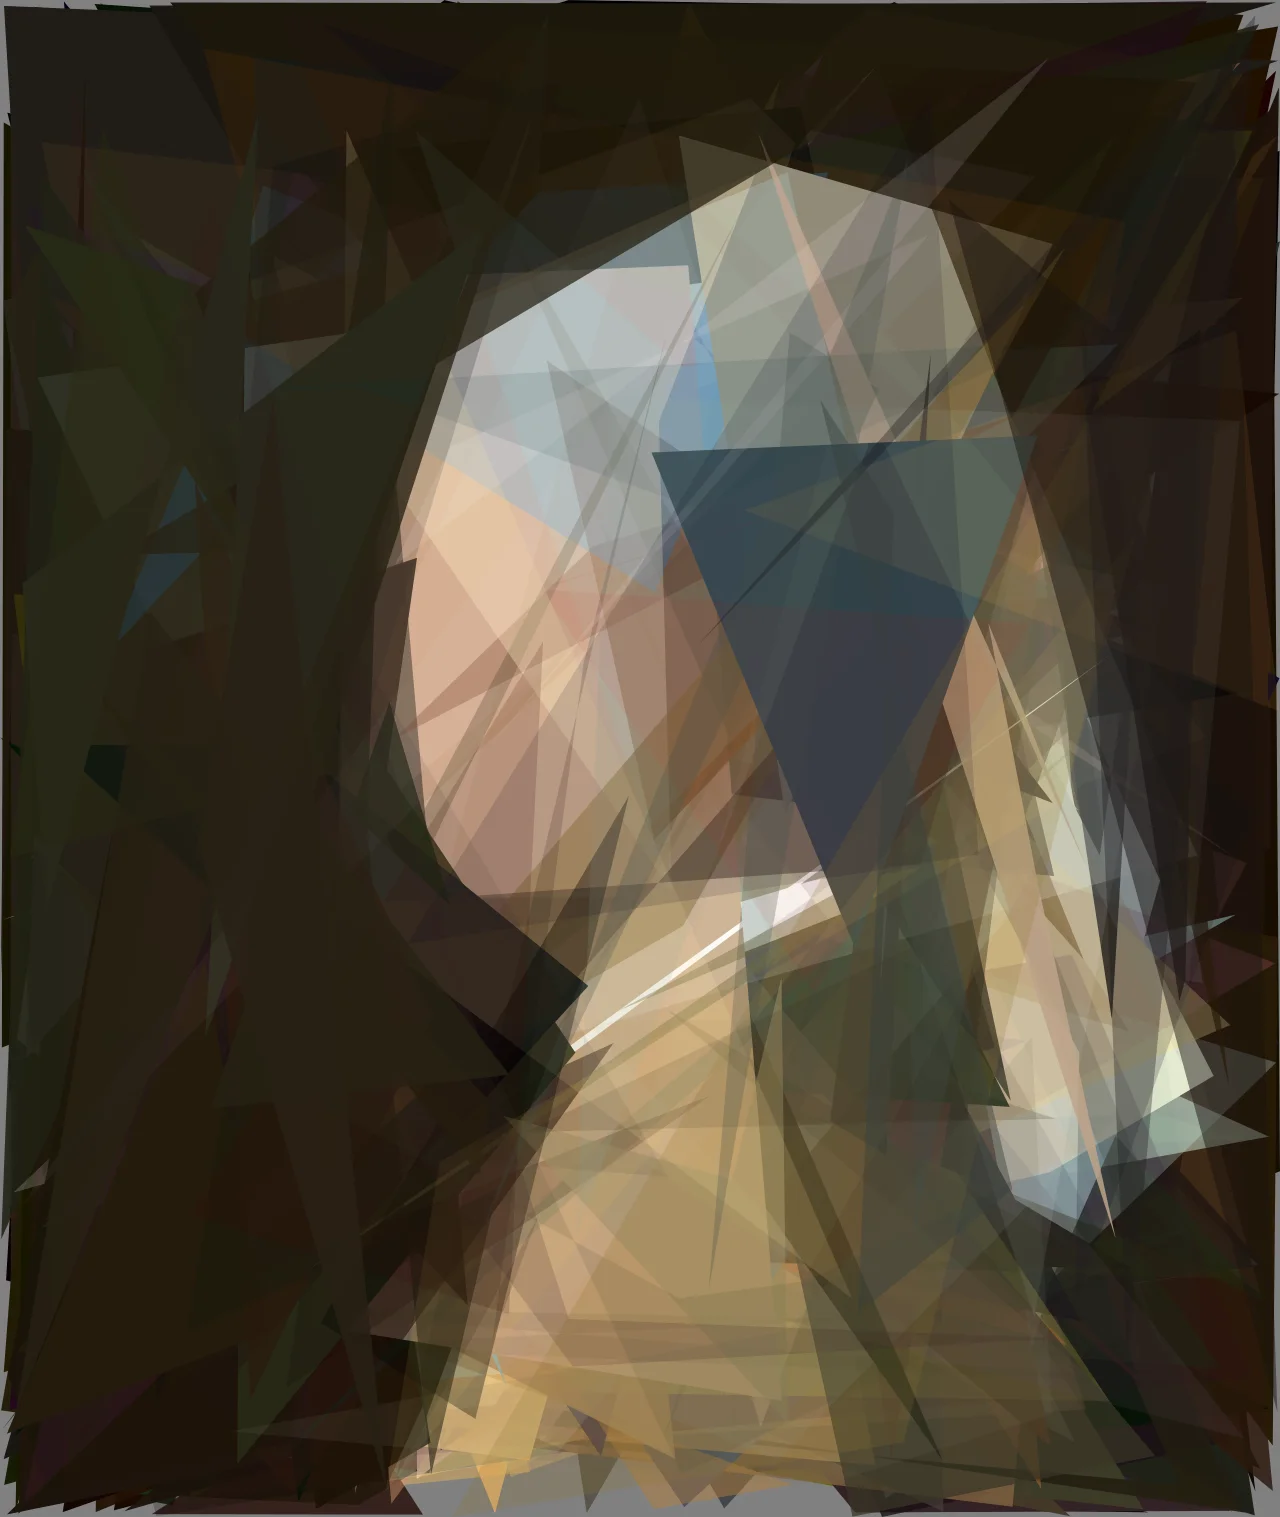 An abstract version of Girl with a Pearl Earring by Vermeer